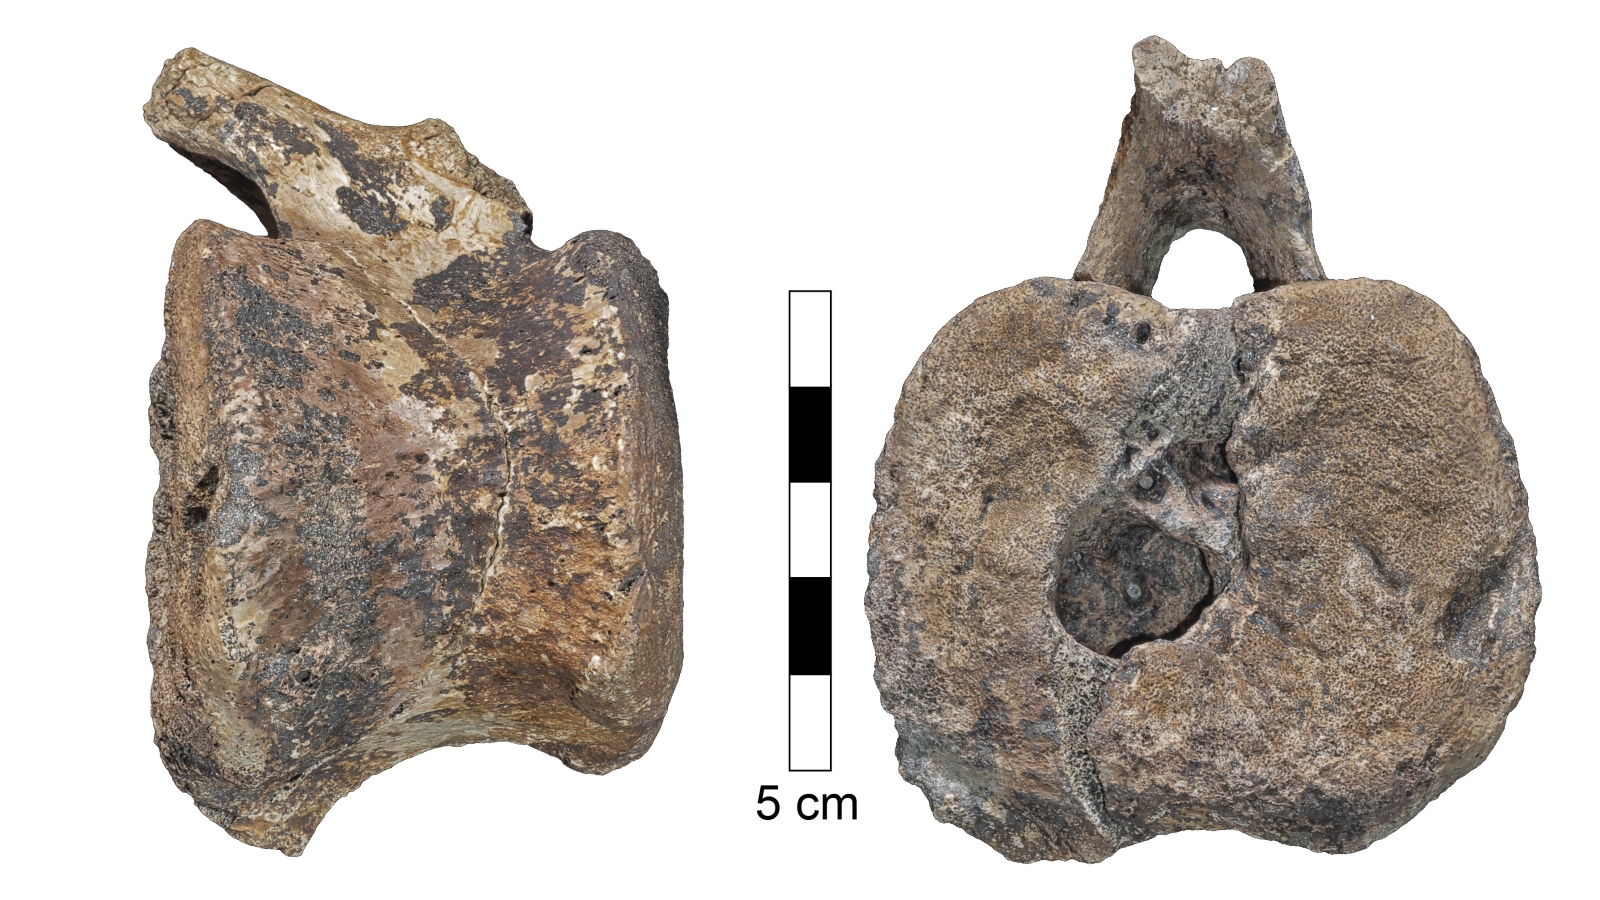 In these views of the hadrosaur vertebra you can see the space that contained the tumor. Image courtesy of Ariel Pokhojaev/Sackler Faculty of Medicine, Tel-Aviv University